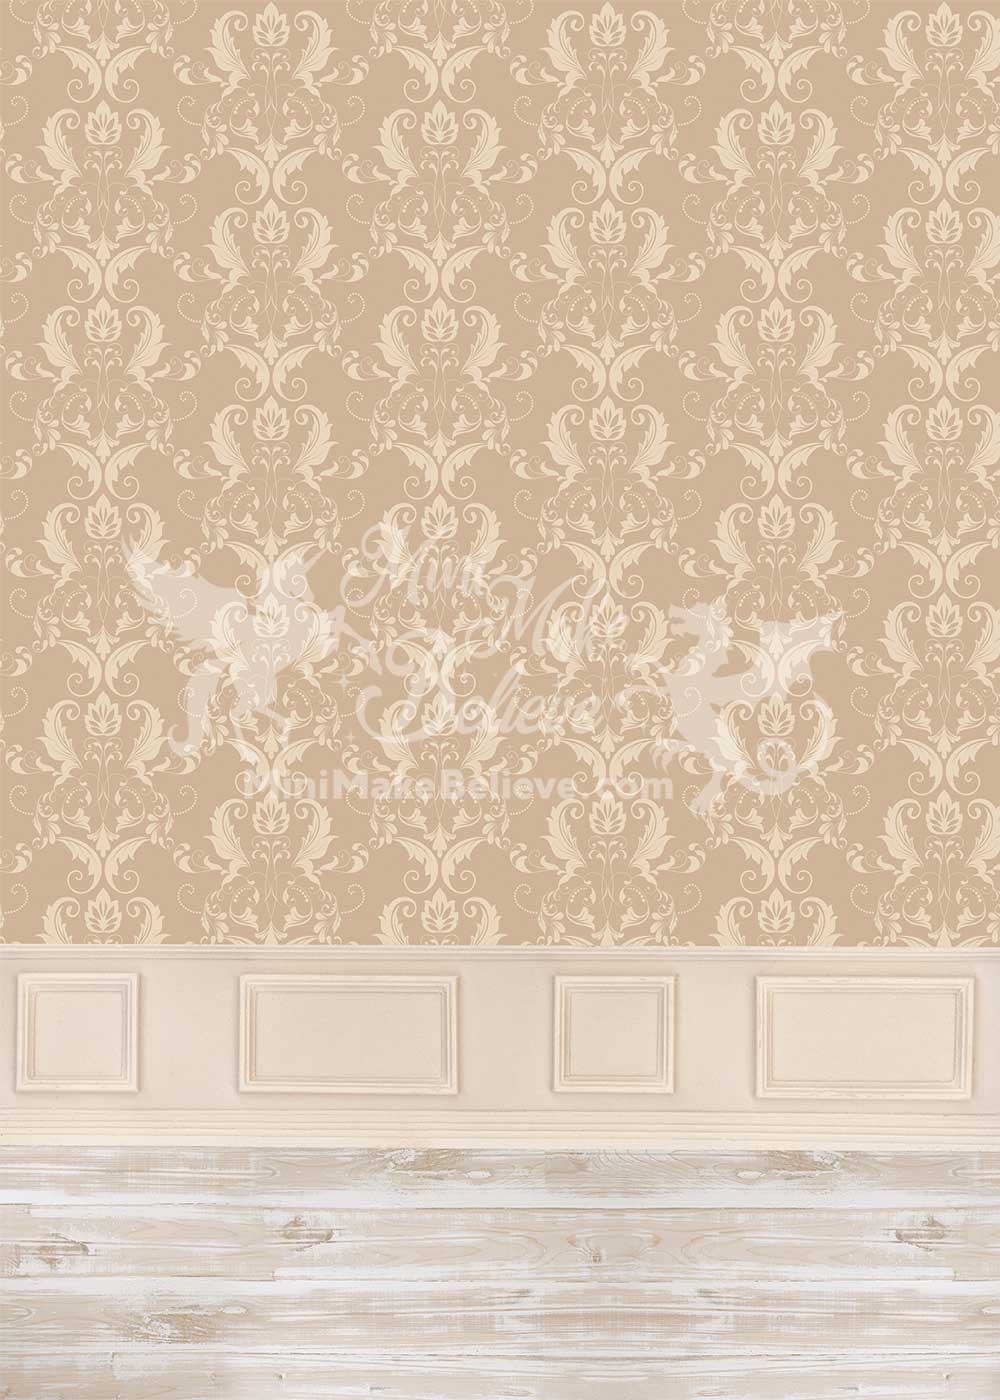 Kate Tan Beige Classical Damask Backdrop Ornate Wall with Wainscot Wedding Designed by Mini MakeBelieve